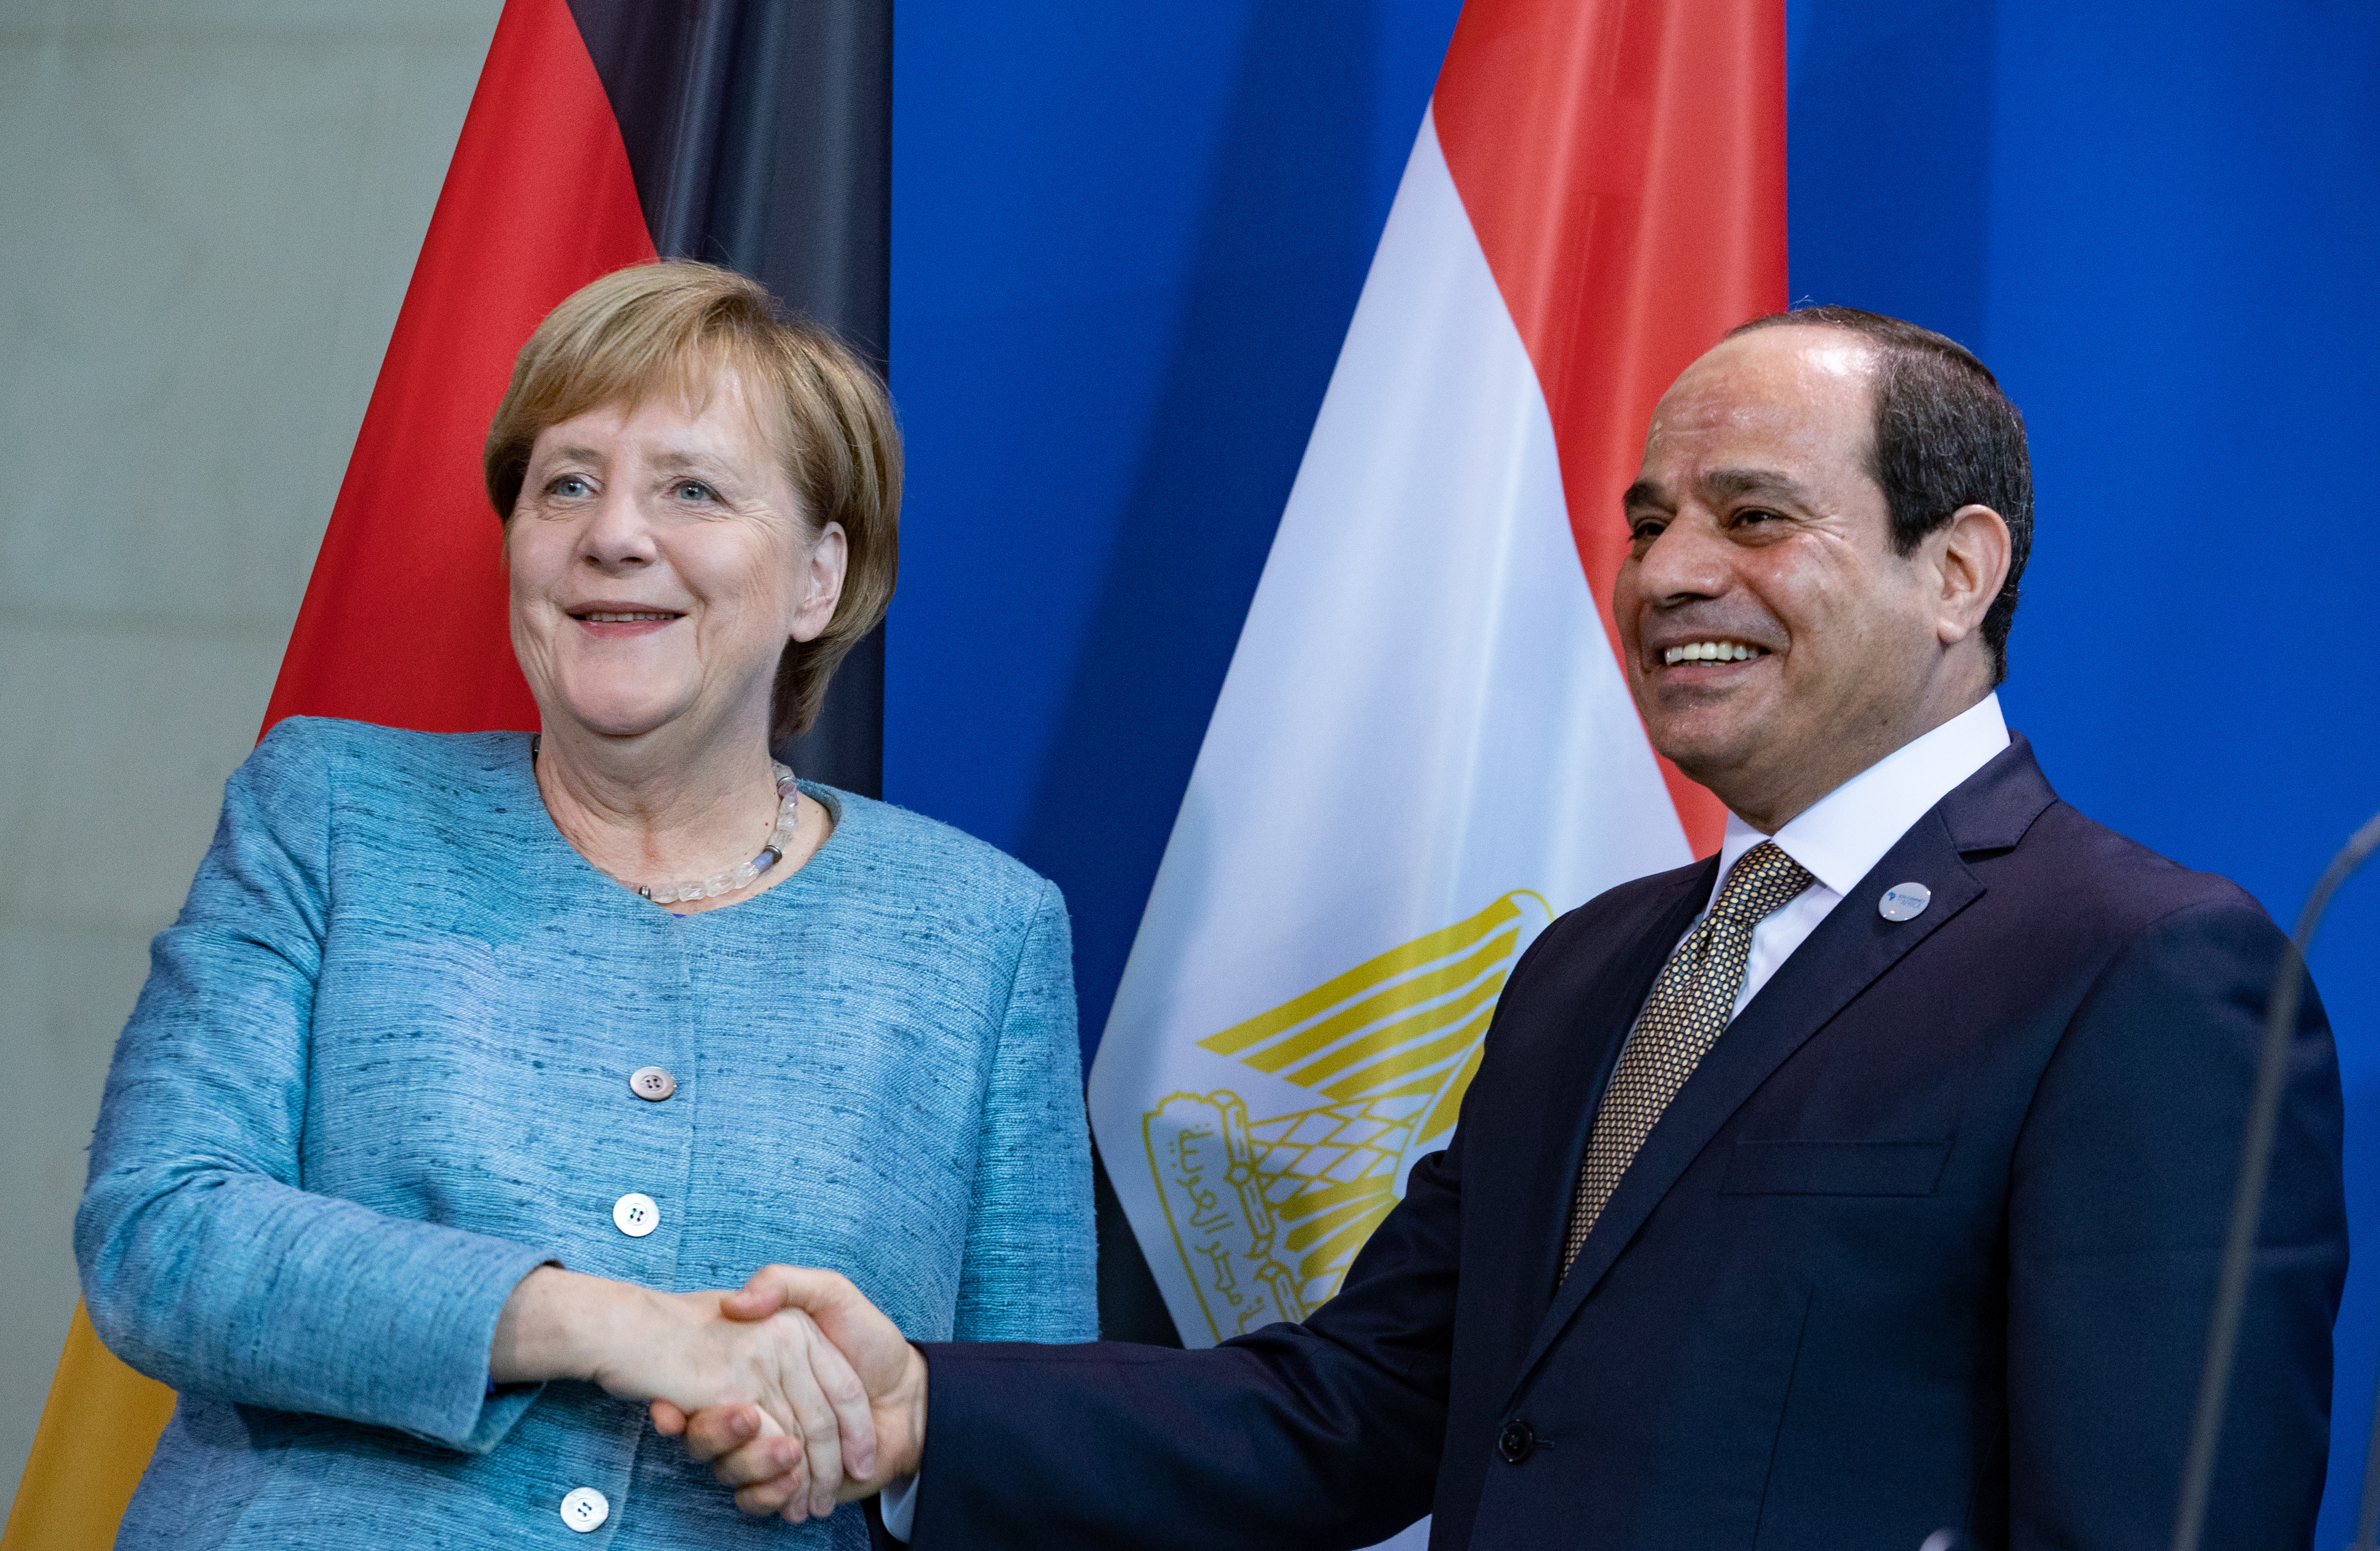 epa07131550 German Chancellor Angela Merkel (L) shakes hands with Egyptian President Abdel Fattah al-Sisi at the chancellery in Berlin, Germany, 30 October 2018. Al-Sisi is in Germany for a four-day visit including a participation in the G20 Compact with Africa summit.  EPA/HAYOUNG JEON